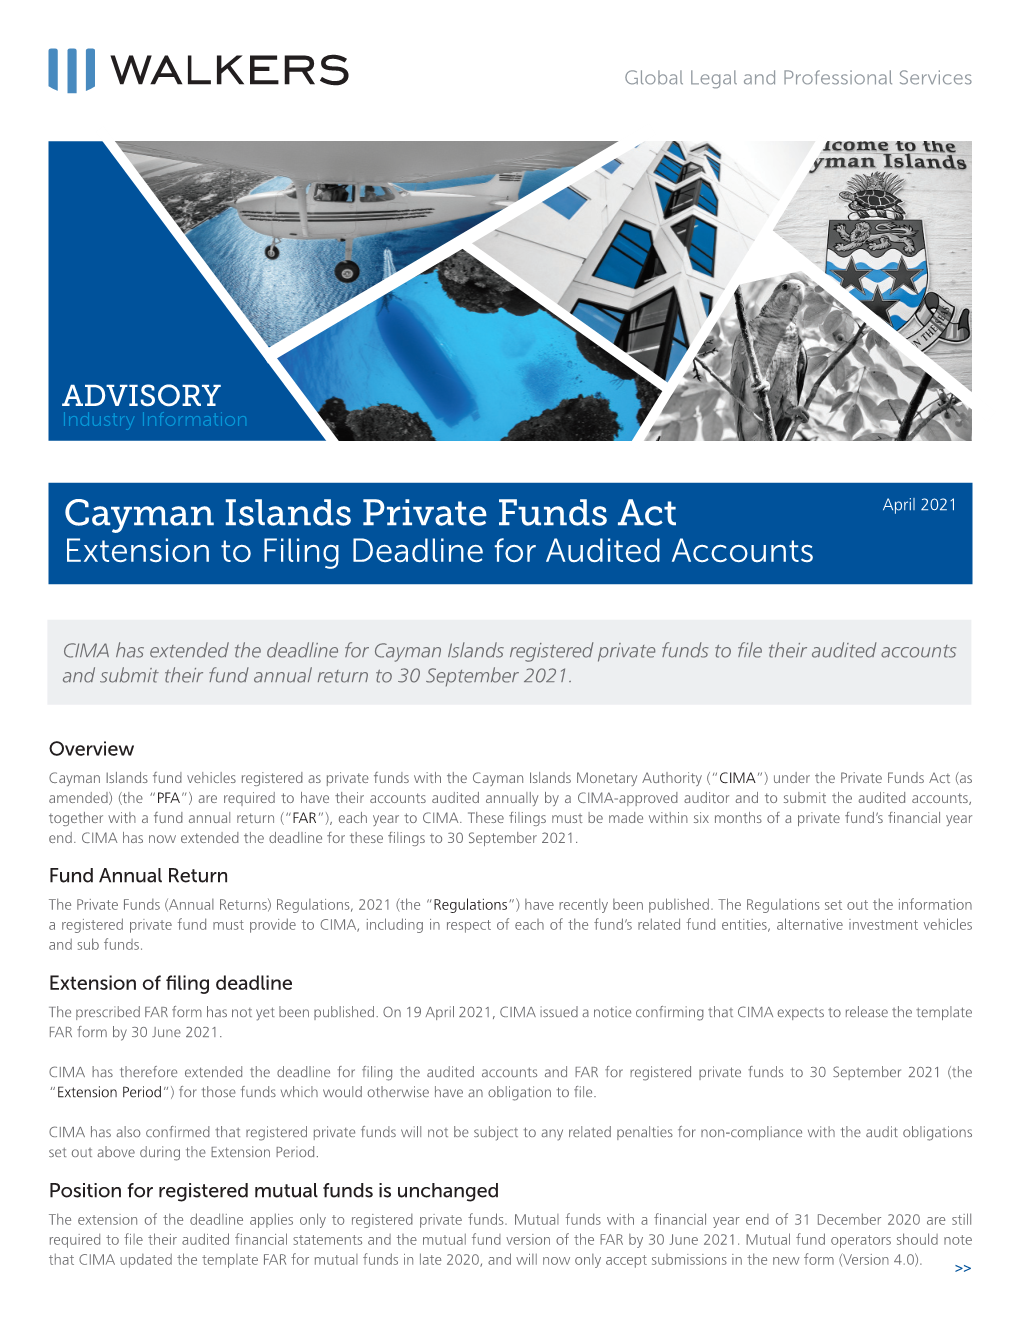 Cayman Islands Private Funds Act April 2021 Extension to Filing Deadline for Audited Accounts